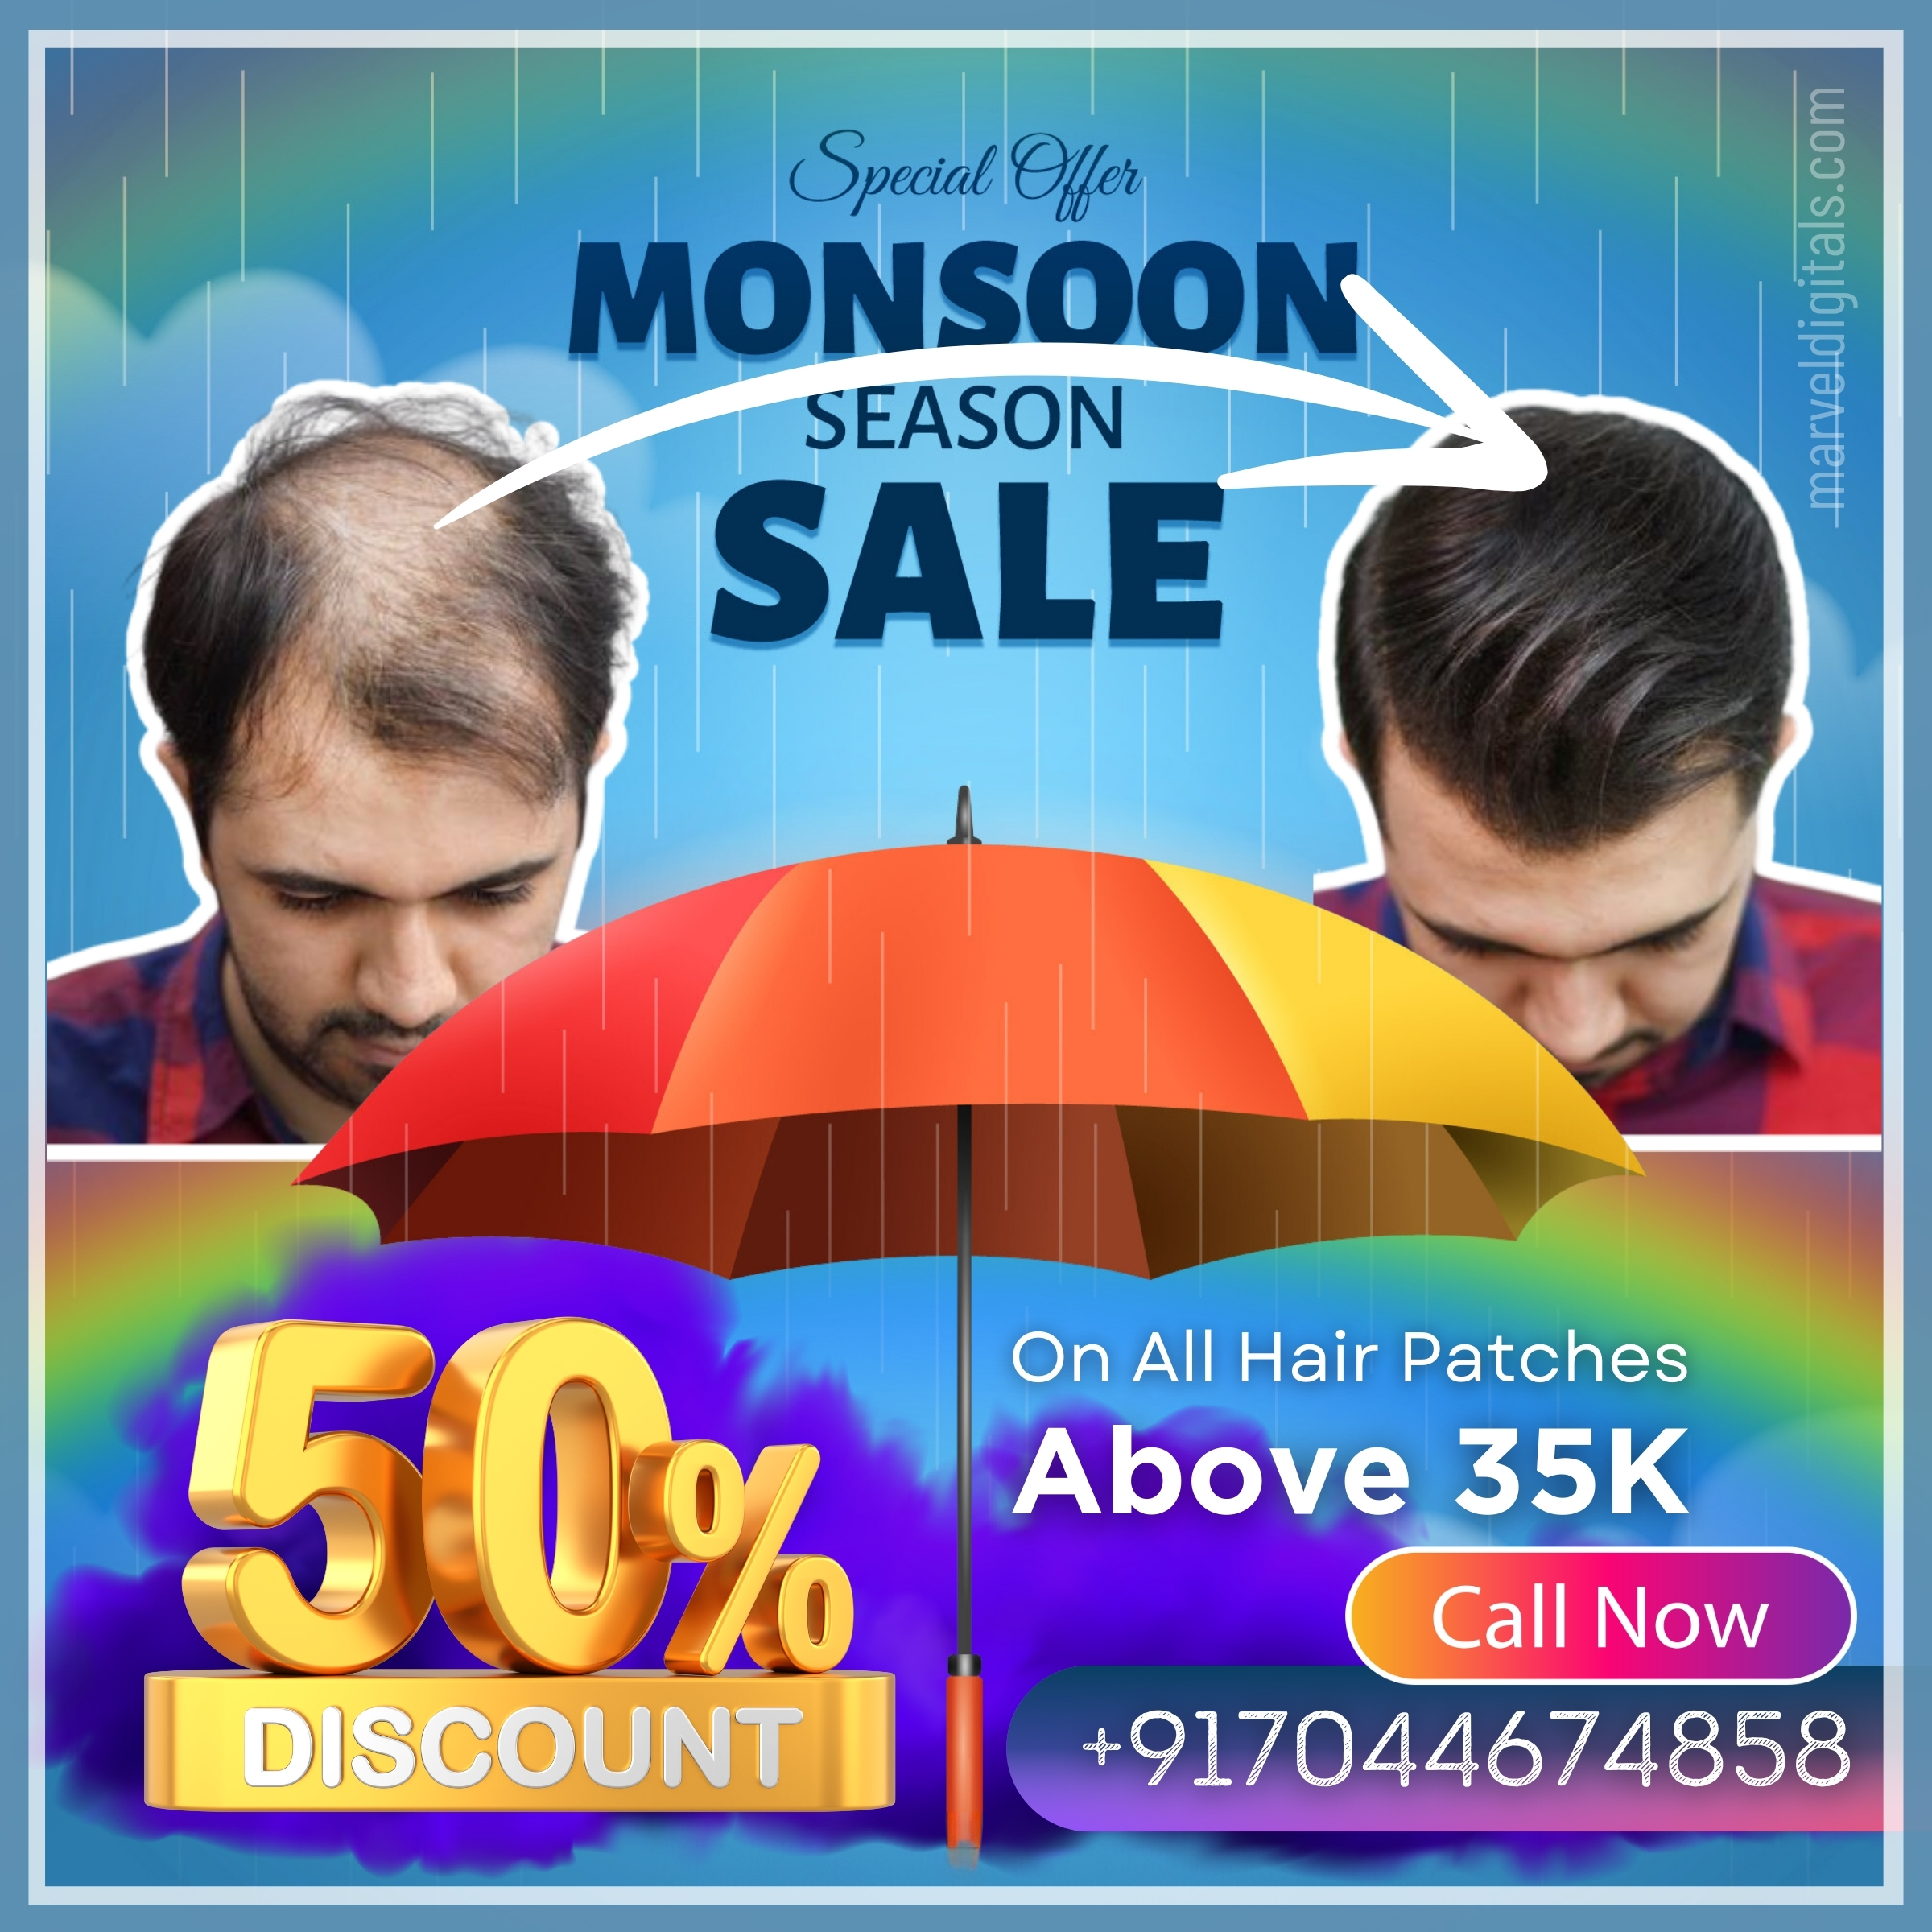 Get back hair style with non-surgical hair replcaement in kolkata, starting just ₹5999. Monsoon offer on hair wigs and hair patches with up to 50% Off on all hair wigs and hair patches above hair wigs of 35 thousand.